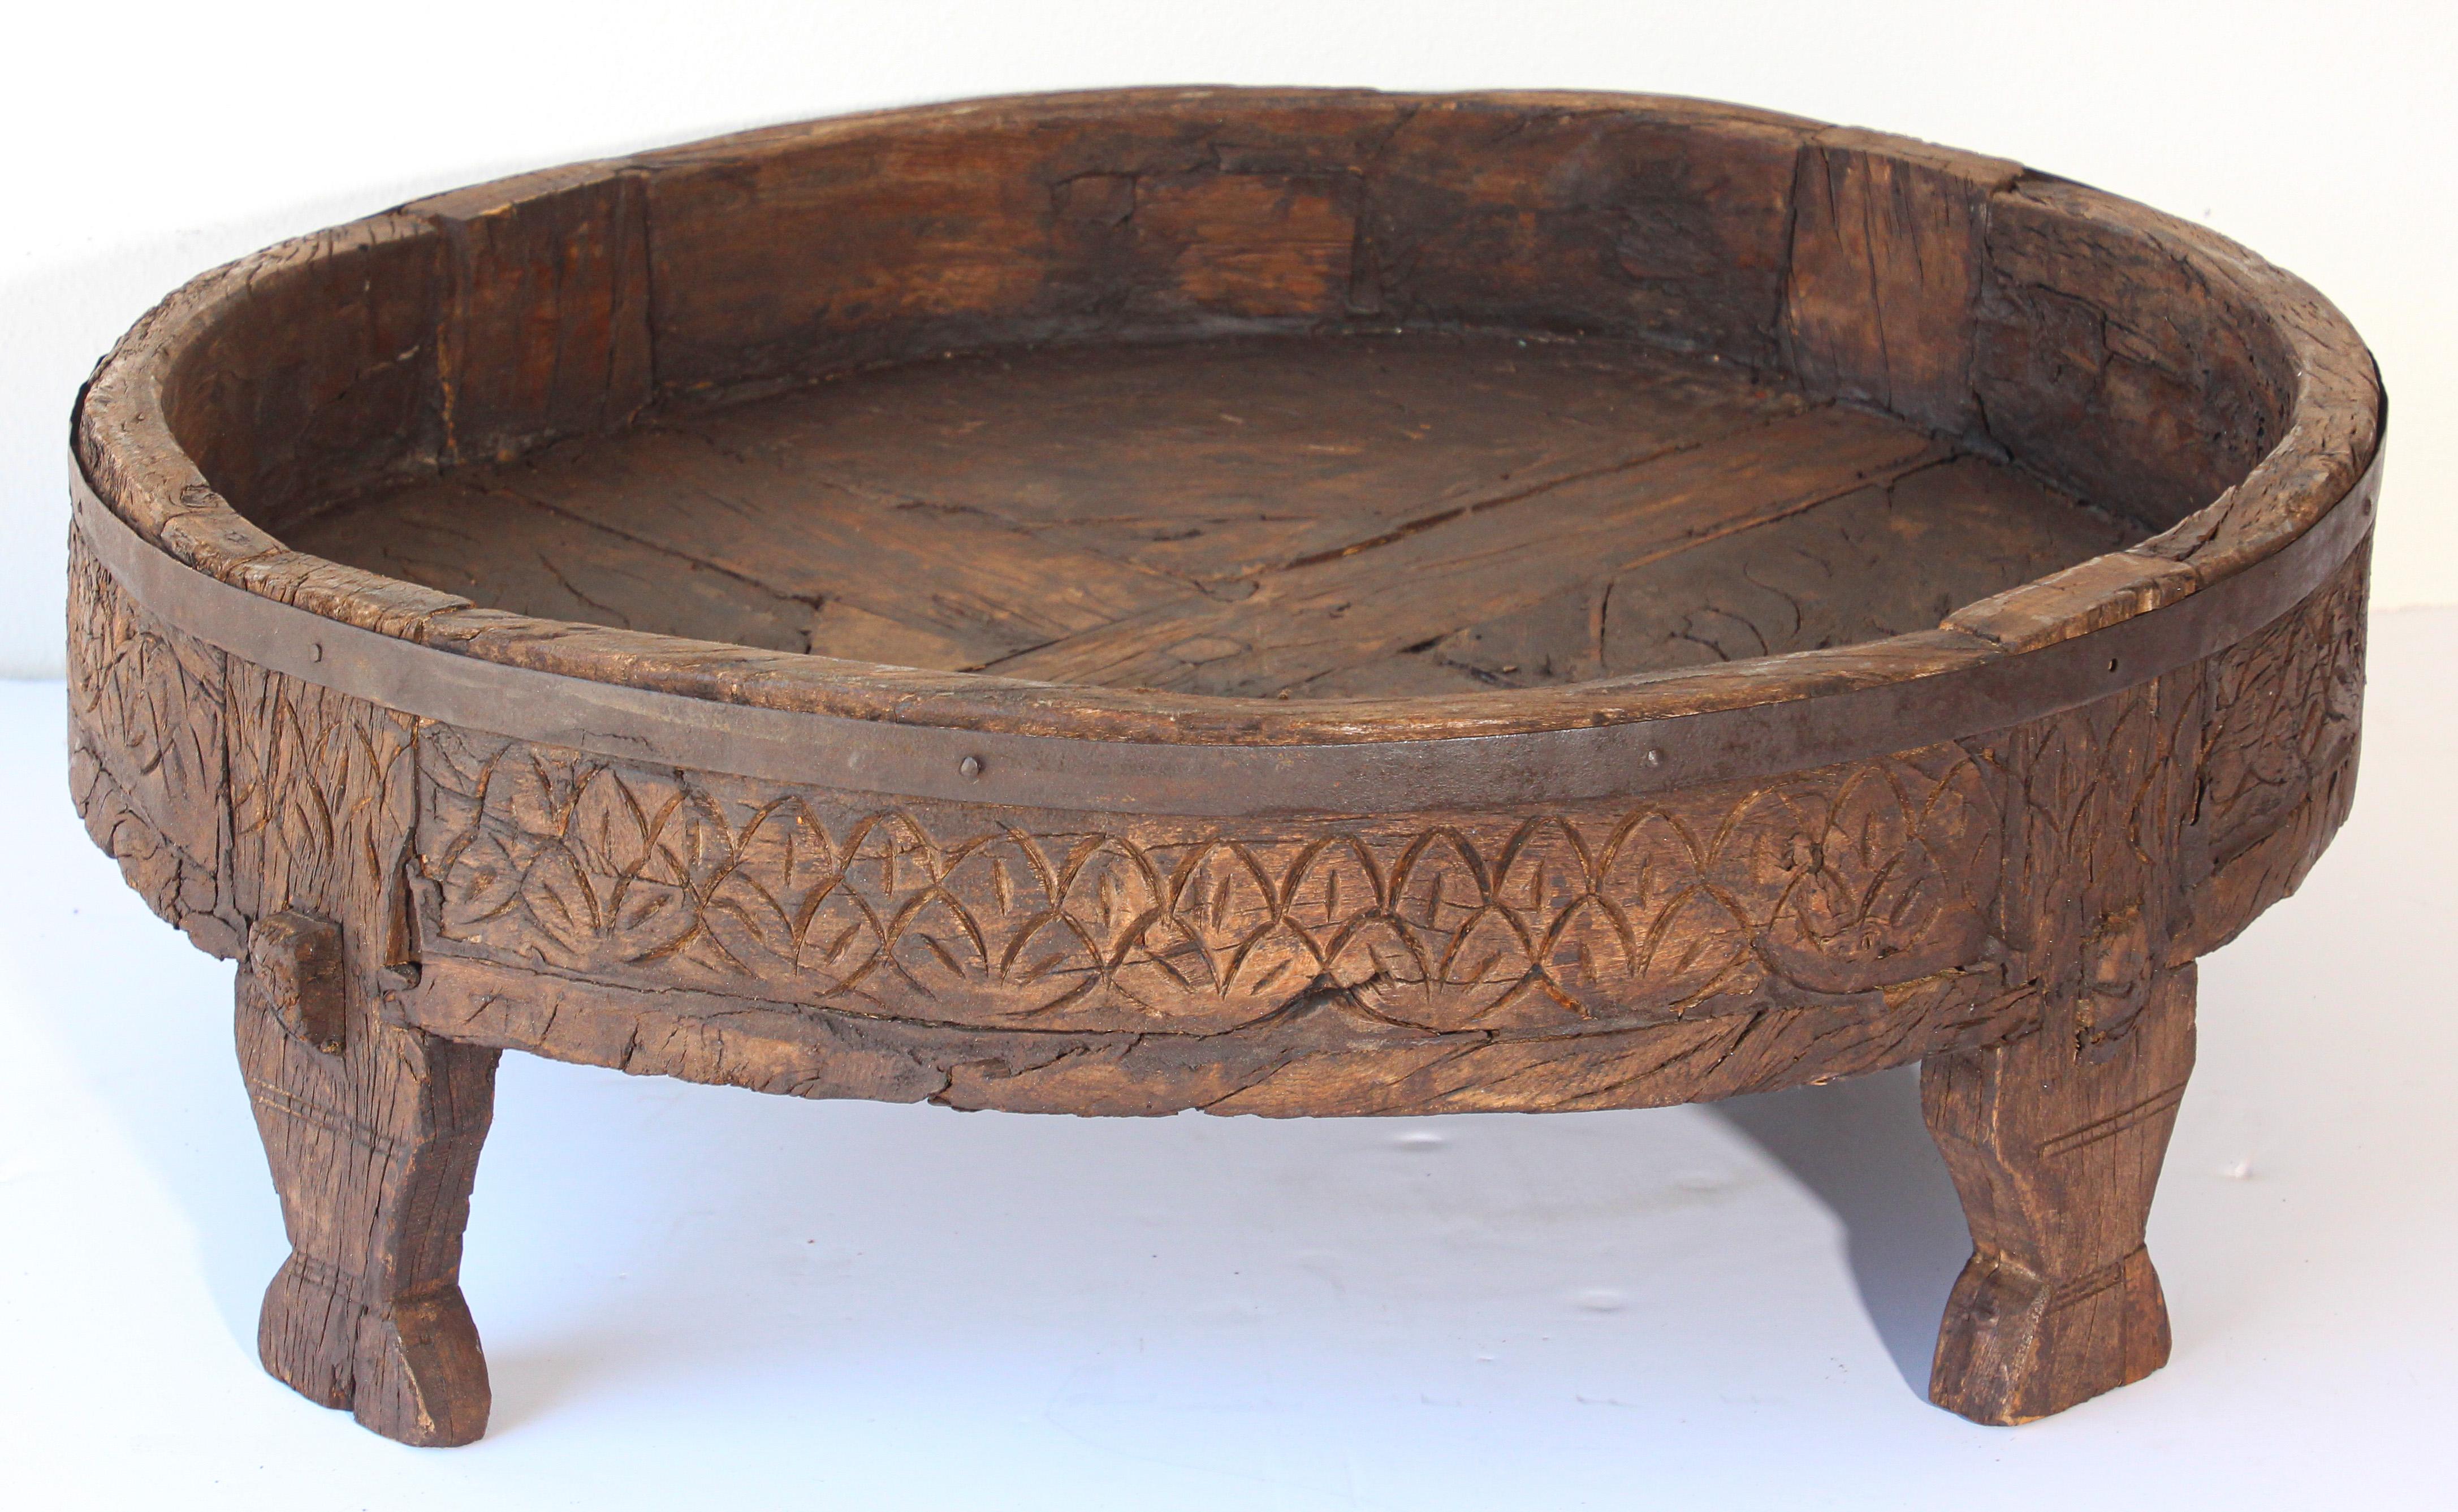 Large antique hand carved wood Indian grinder tribal teak table.
Walnut color hand carved with geometric tribal design.
Handcrafted of wood and iron, hand carved with geometric Ethnic tribal design.
Very sturdy rustic wood table with nice patina,